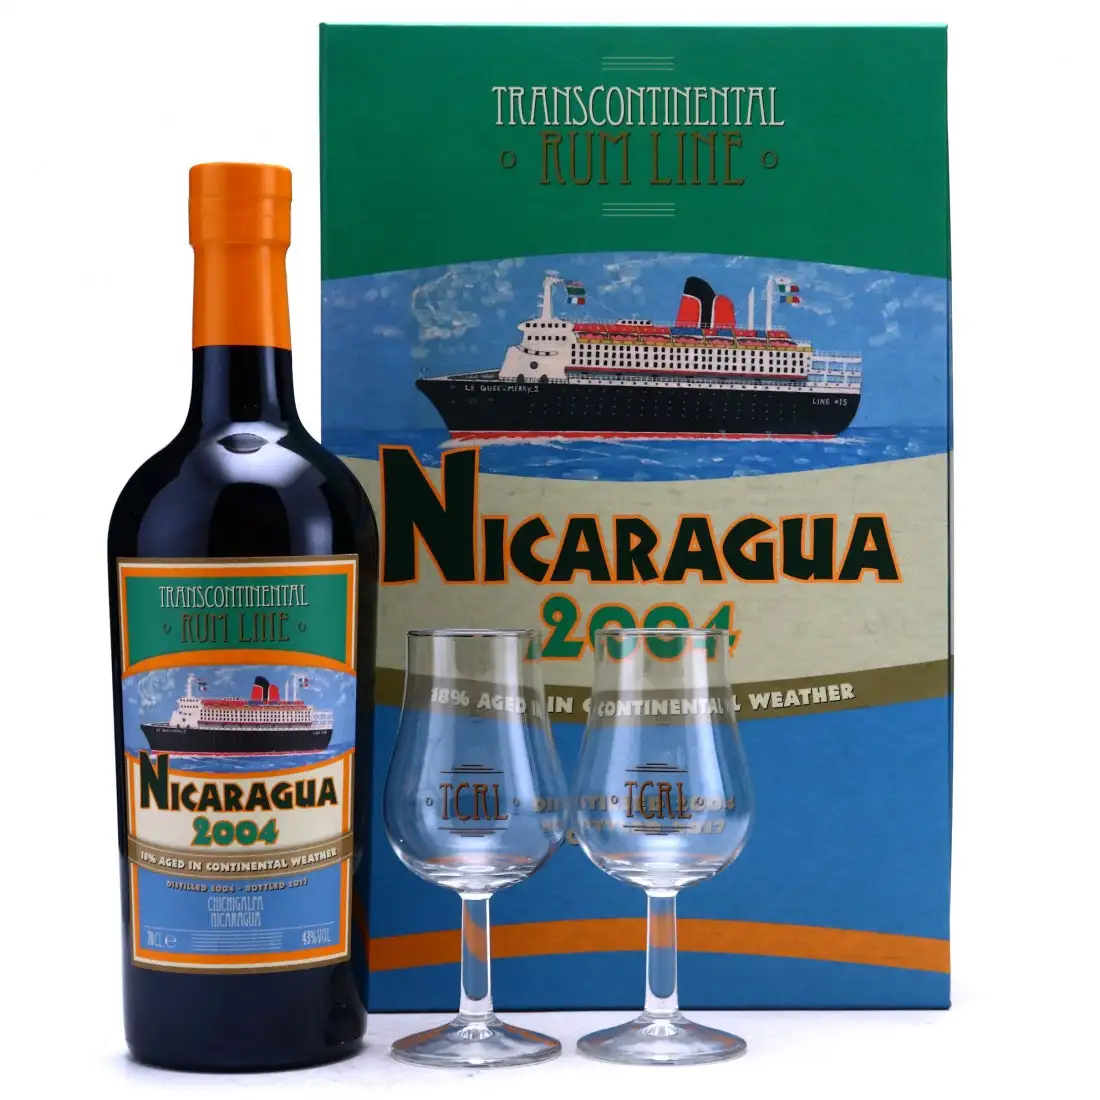 Image of the front of the bottle of the rum Nicaragua